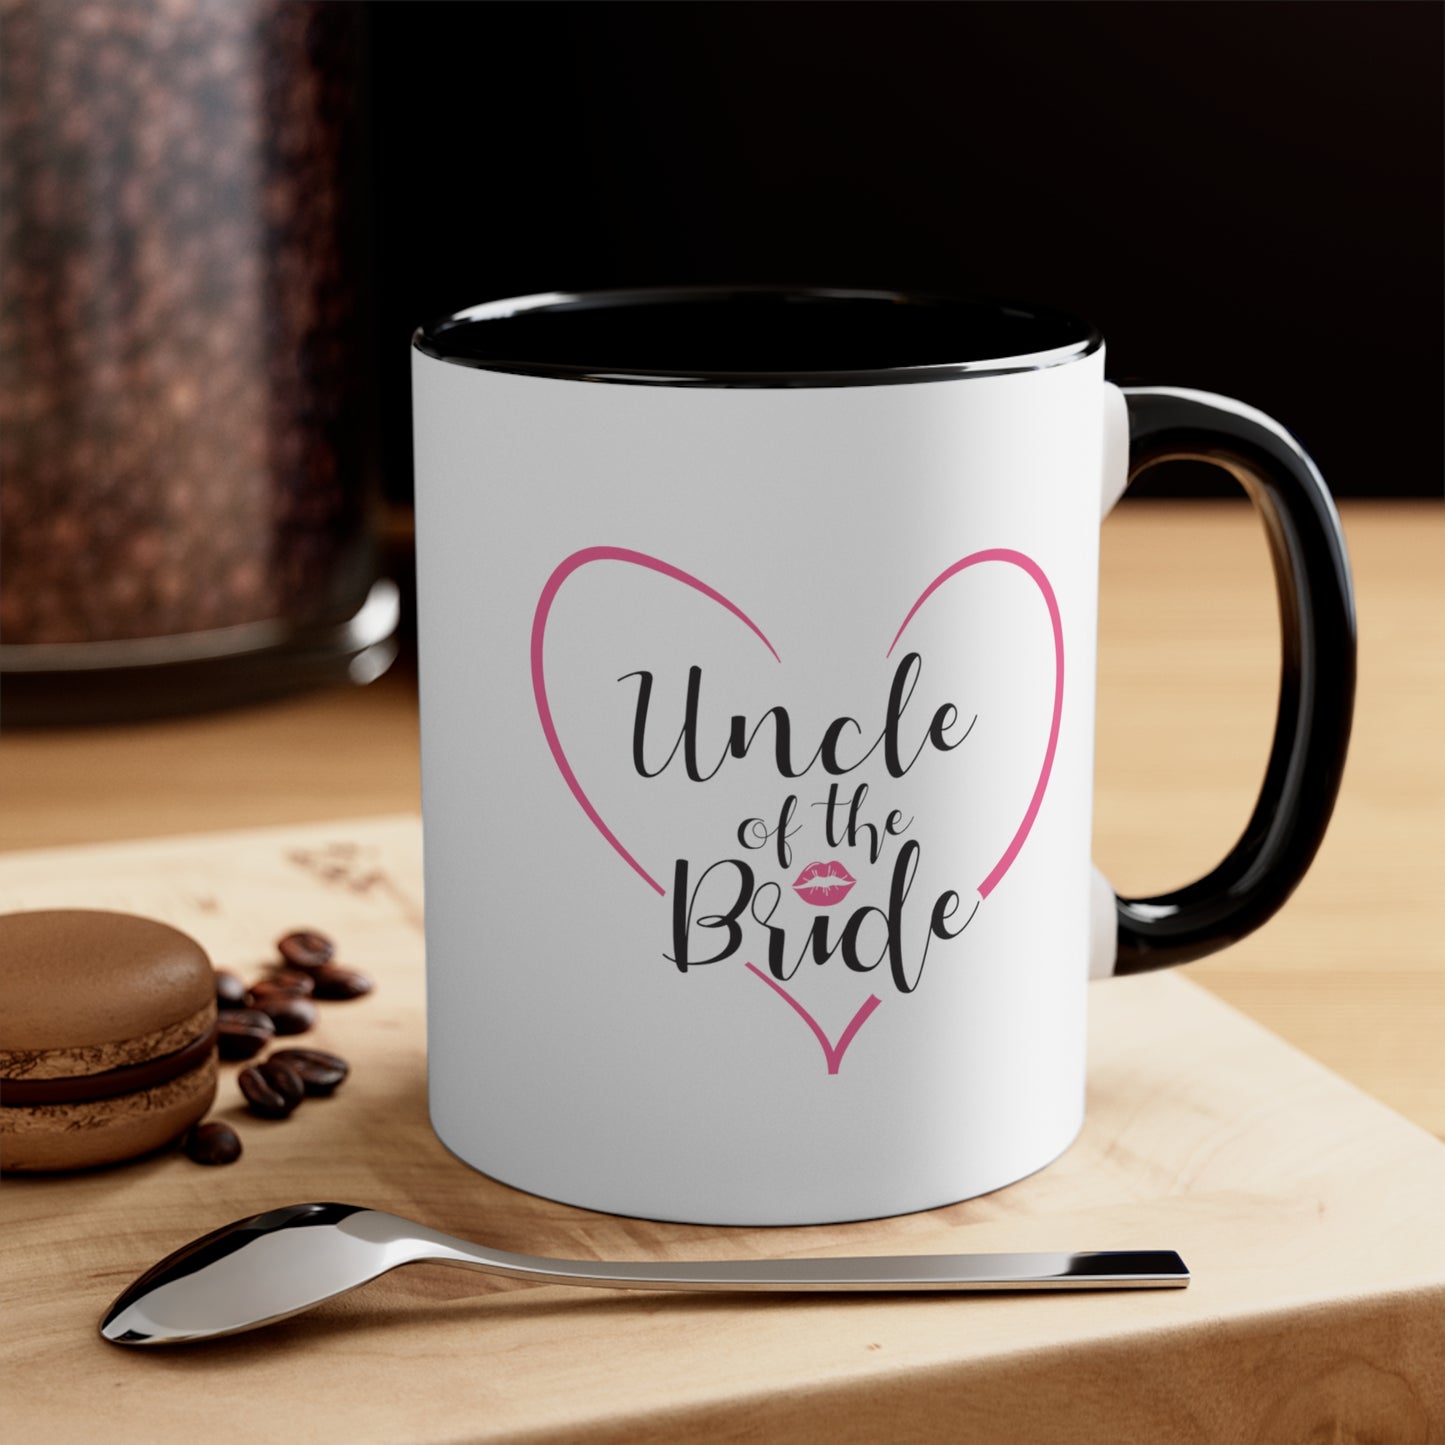 Uncle of the Bride Coffee Mug - Double Sided Black Accent Ceramic 11oz by TheGlassyLass.com